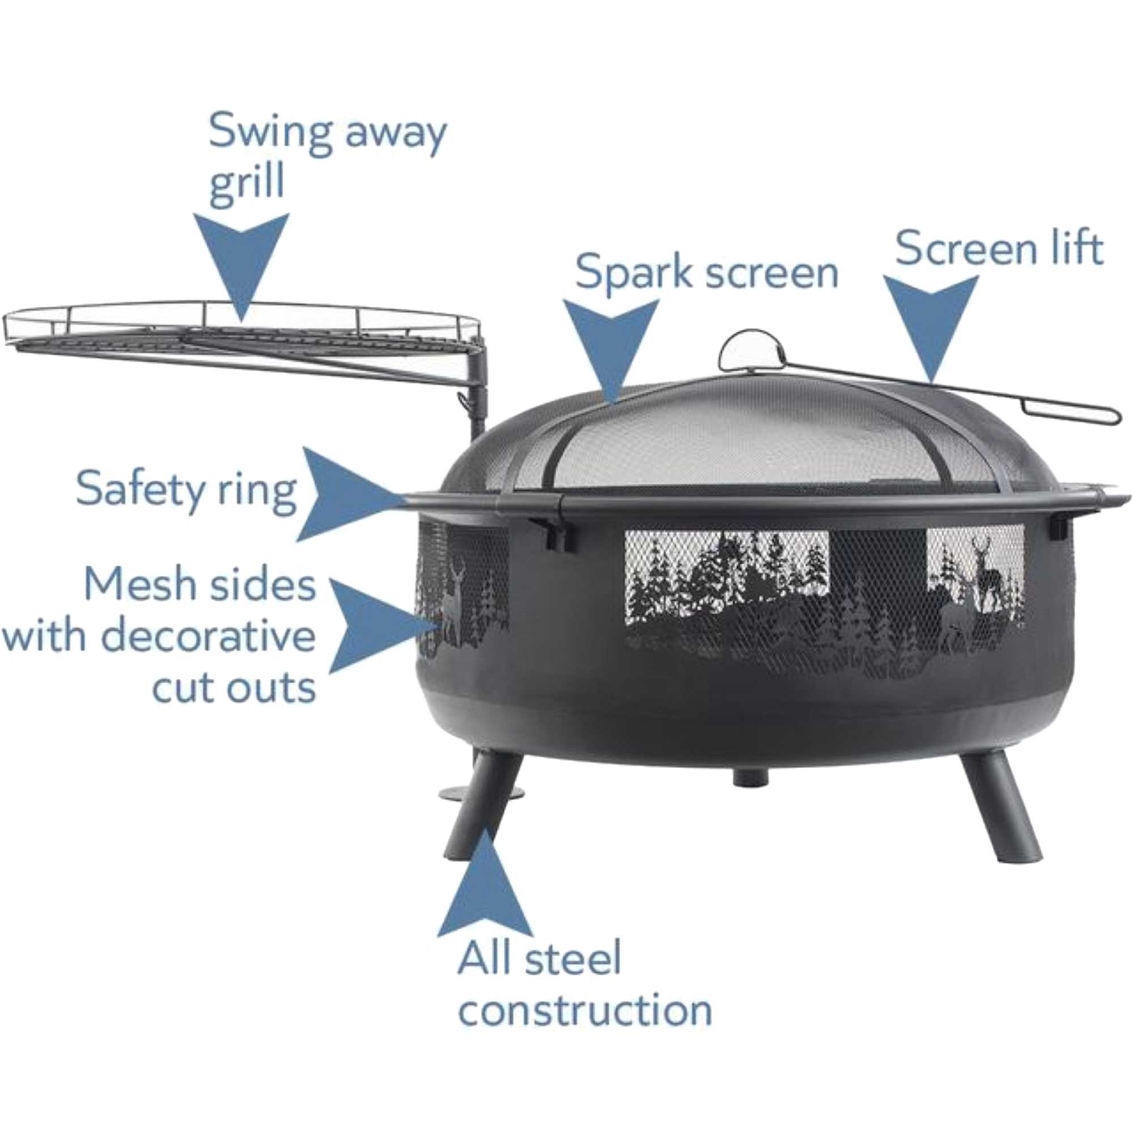 Blue Sky Outdoor Living 36 in. Round Barrel Fire Pit with Swing Away Grill - Image 2 of 4